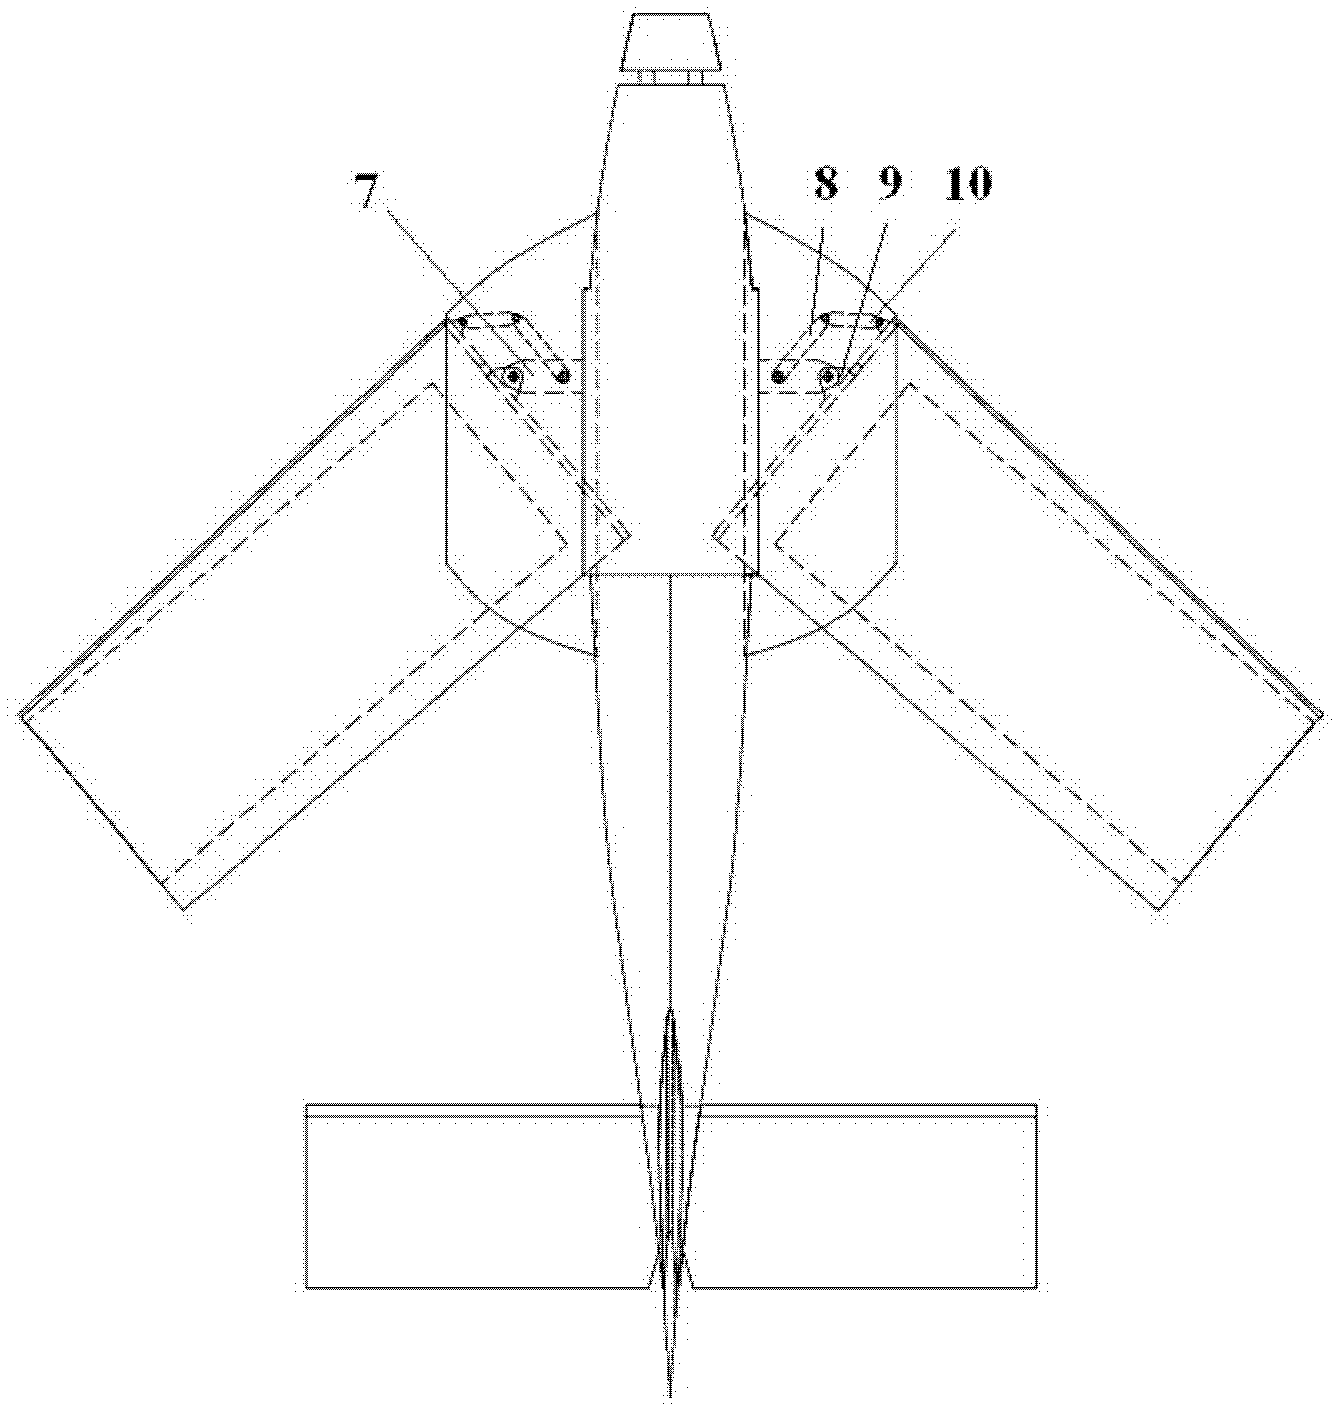 Unmanned aerial vehicle with variable sweepbacks and spans of wings